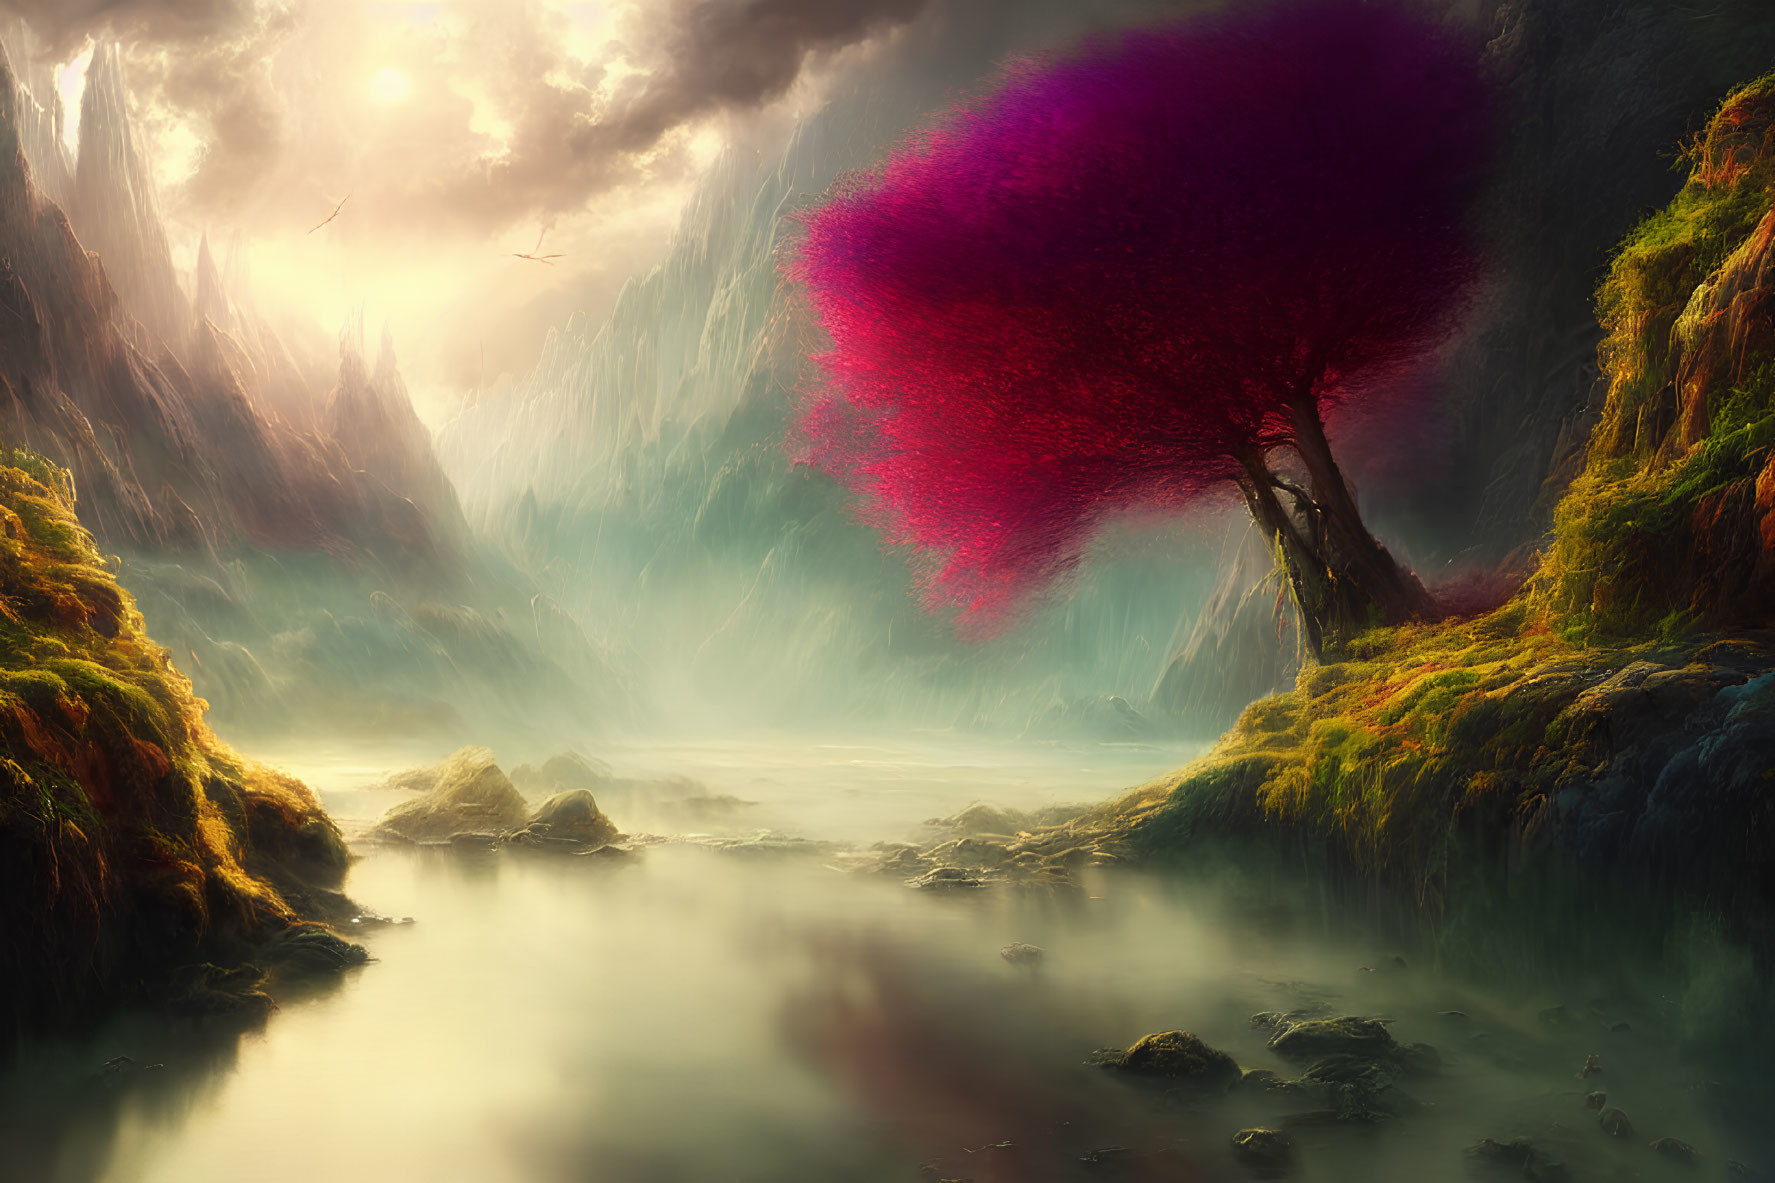 Vibrant red tree in mystical valley with misty waters and soaring mountains